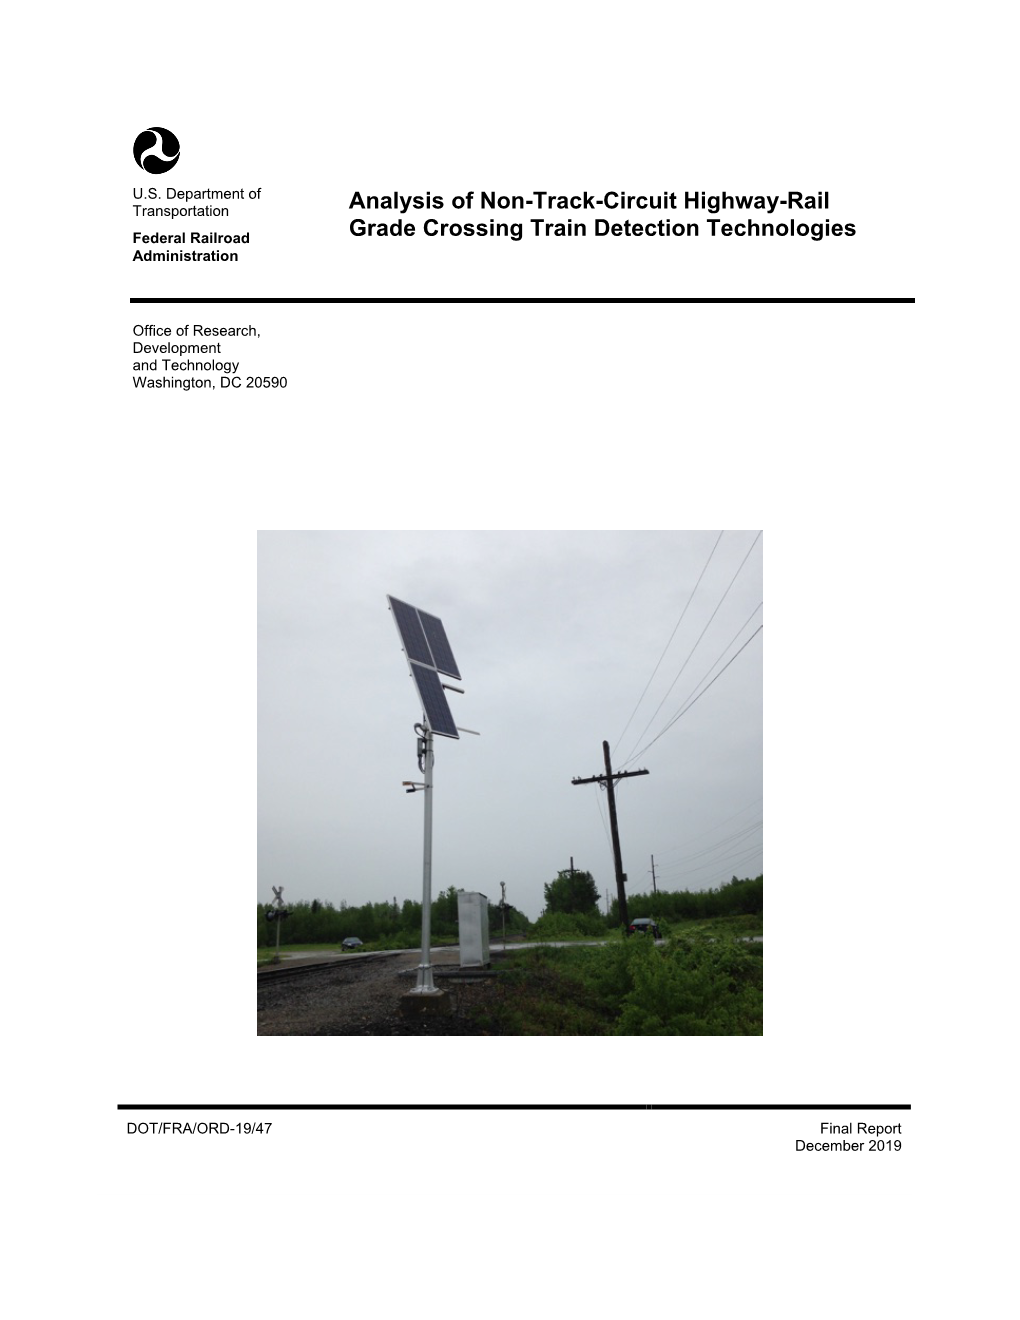 Analysis of Non-Track-Circuit Highway-Rail Grade Crossing Train Detection Technologies